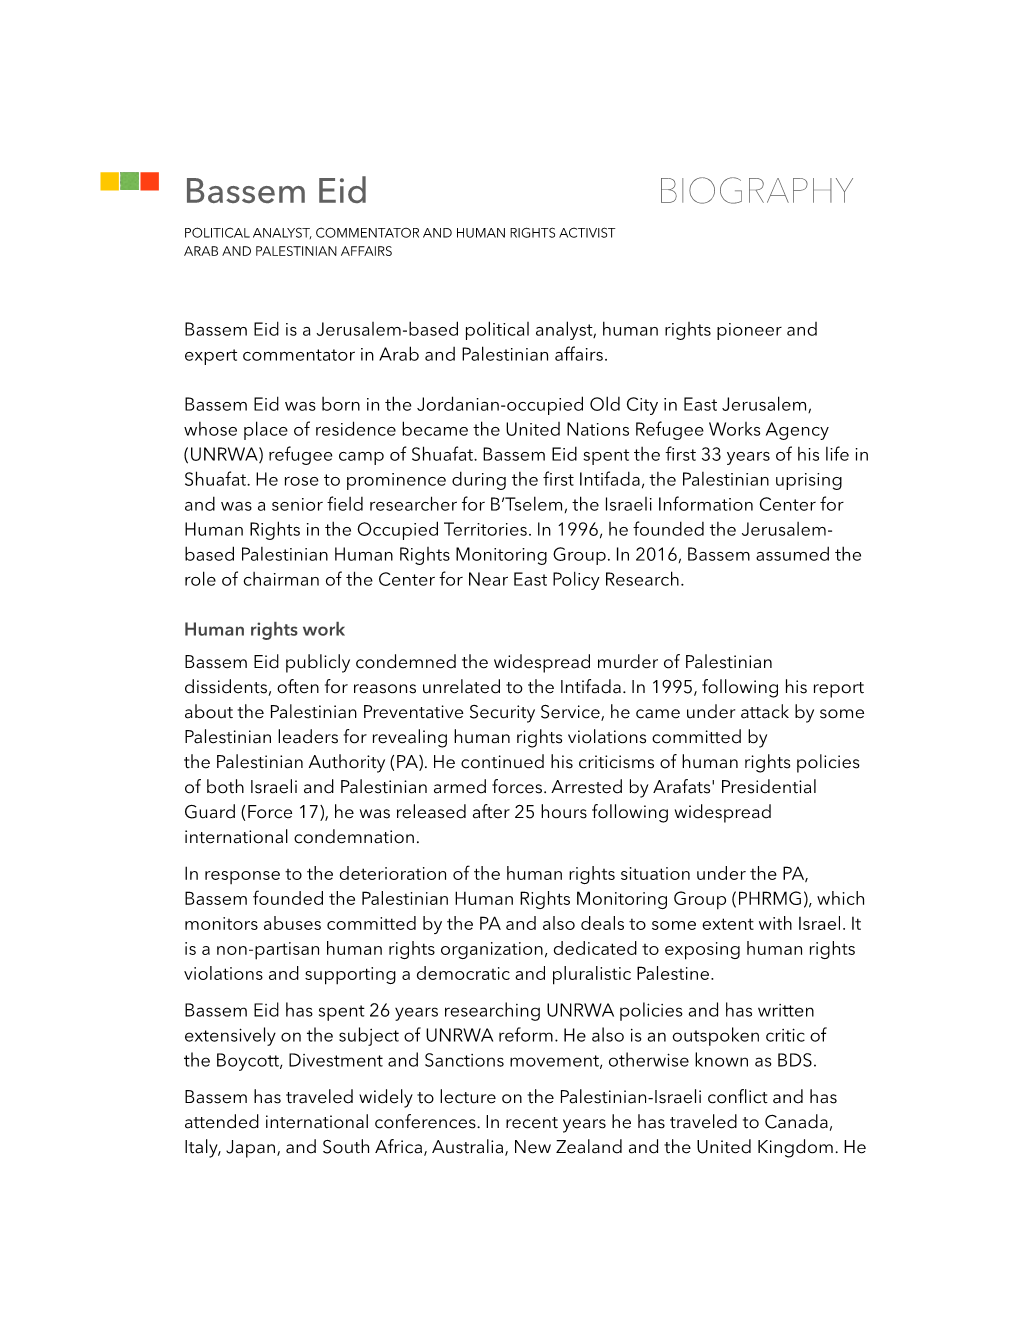 Bassem Eid BIOGRAPHY POLITICAL ANALYST, COMMENTATOR and HUMAN RIGHTS ACTIVIST ARAB and PALESTINIAN AFFAIRS